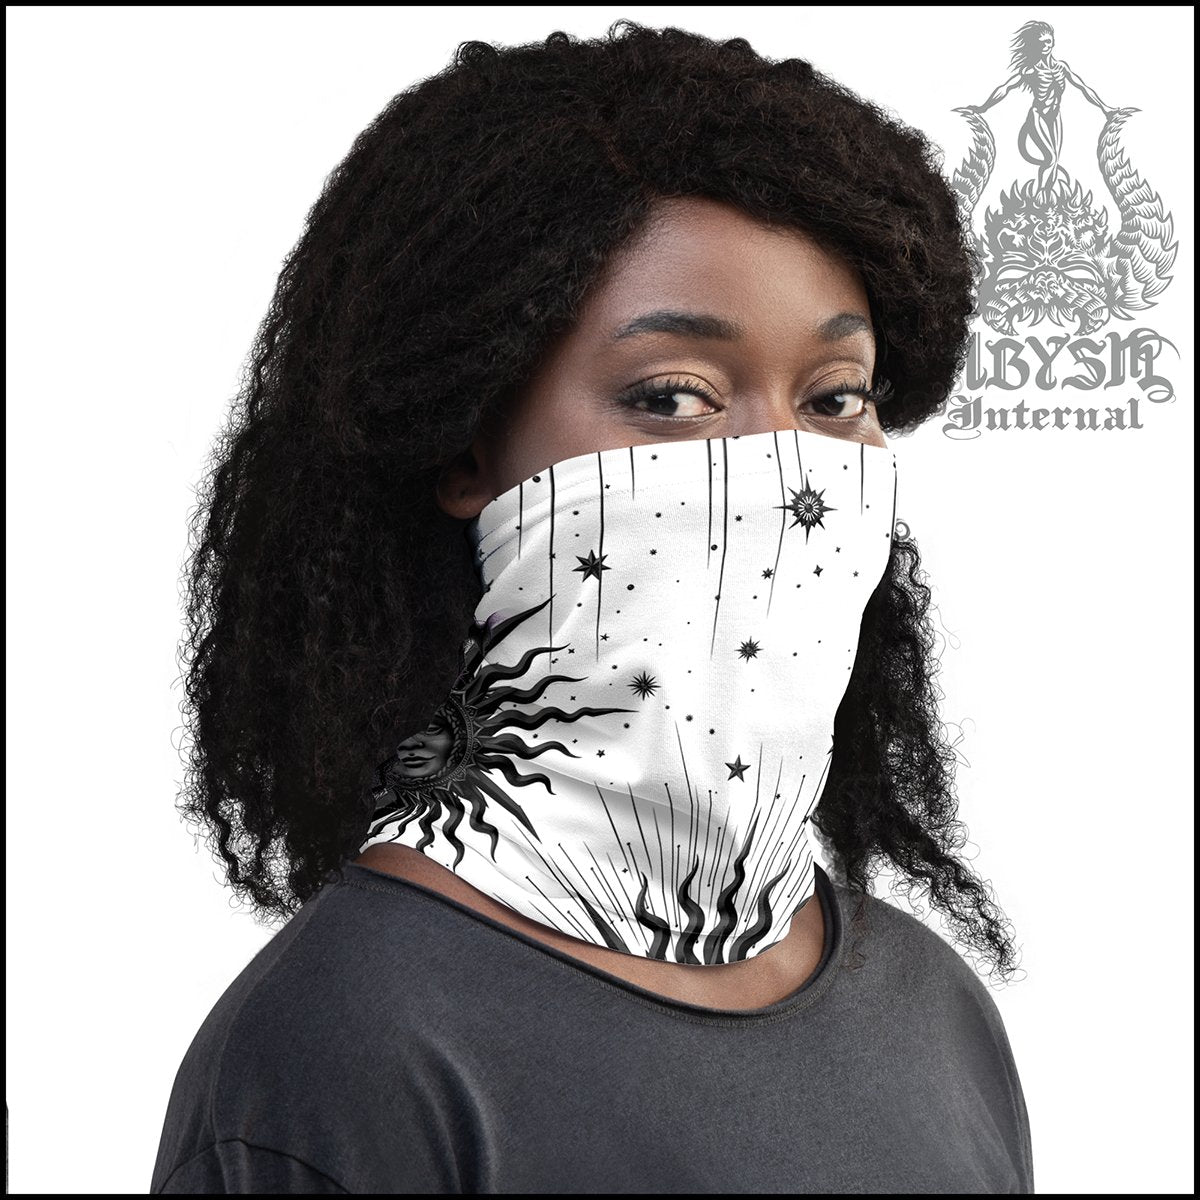 White Goth Neck Gaiter, Witch Tarot Arcana Sun Face Mask, Printed Head Covering, Gothic Outfit - Black - Abysm Internal